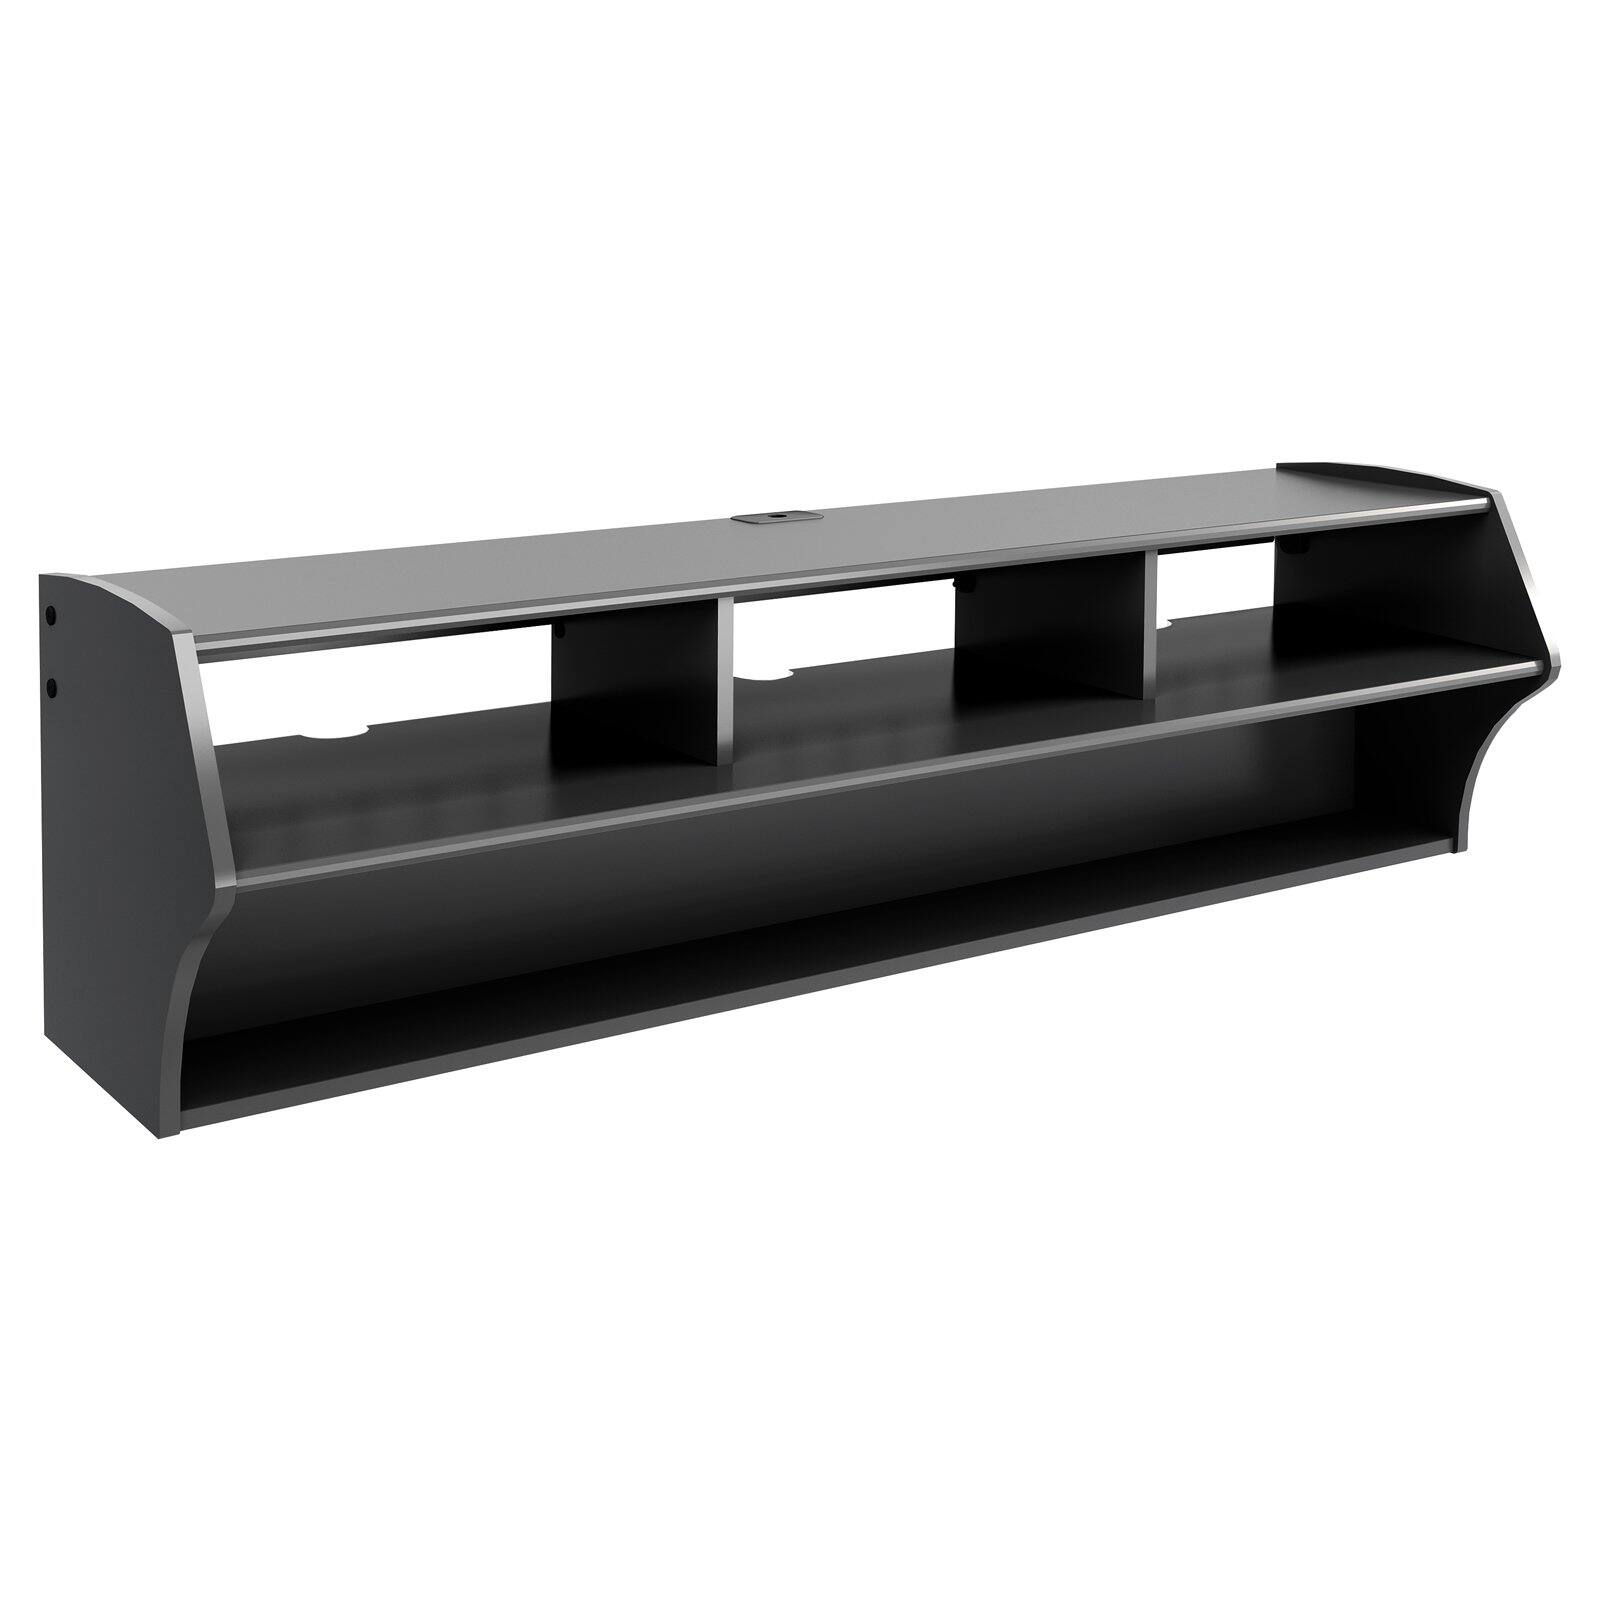 Altus Plus Floating TV Stand for TVs up to 60" - image 4 of 10